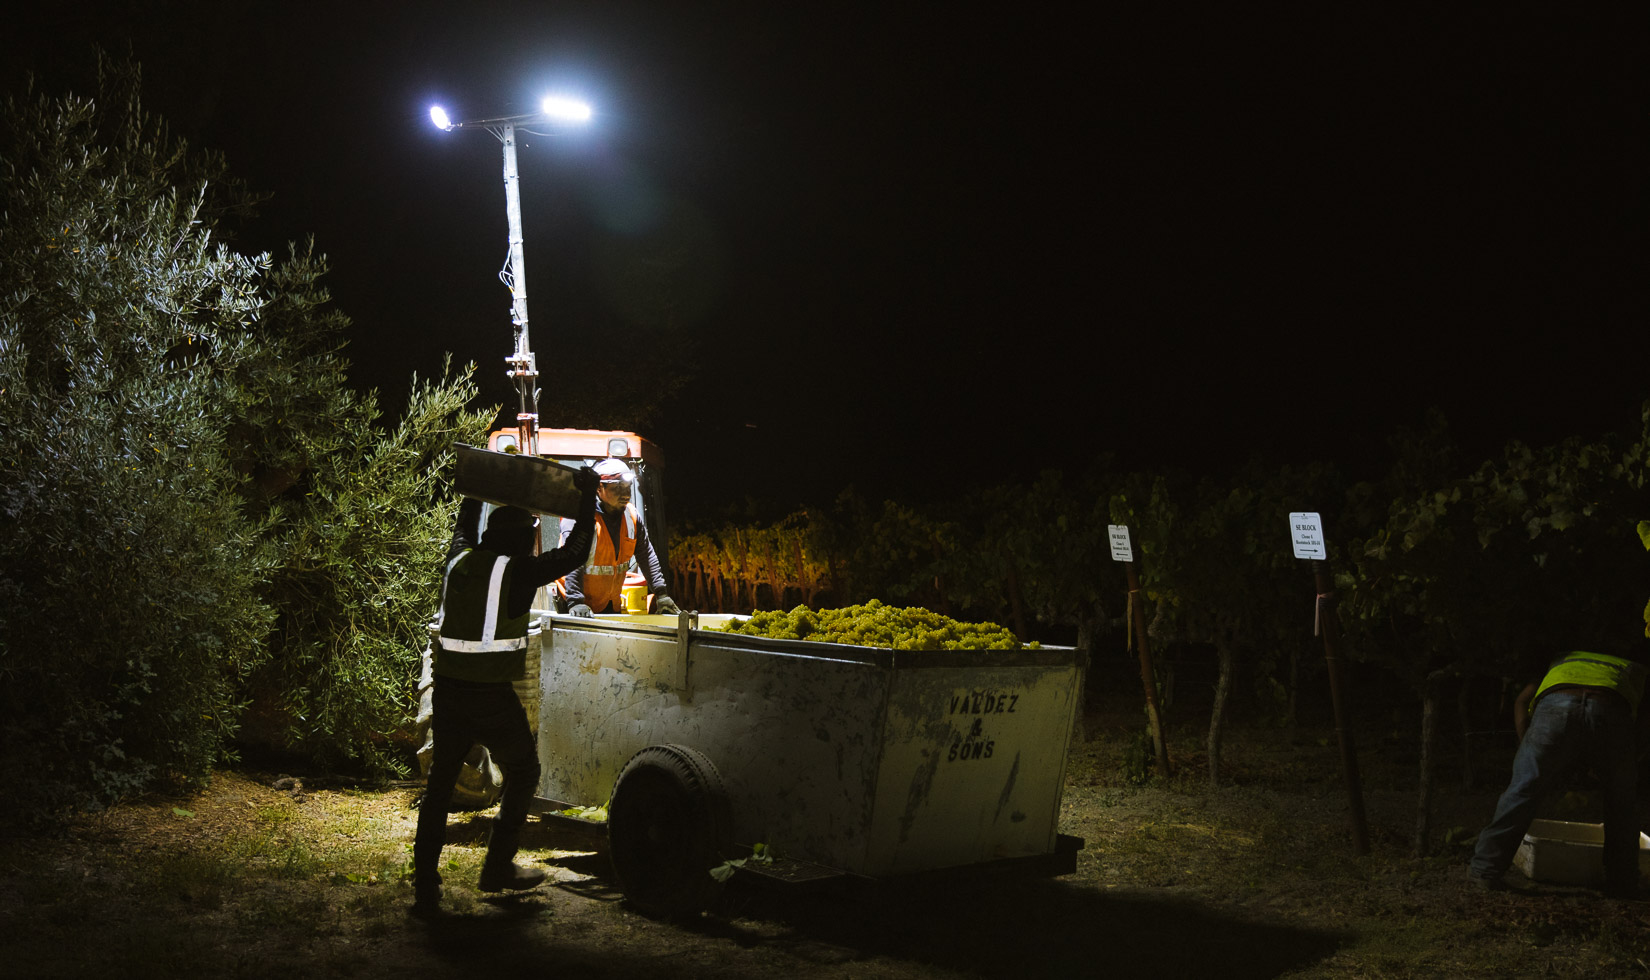 Wide shot of grape harvesters at night pouring a bucket of green chardonnay grapes into a large, full vat behind a tractor in the vineyards.